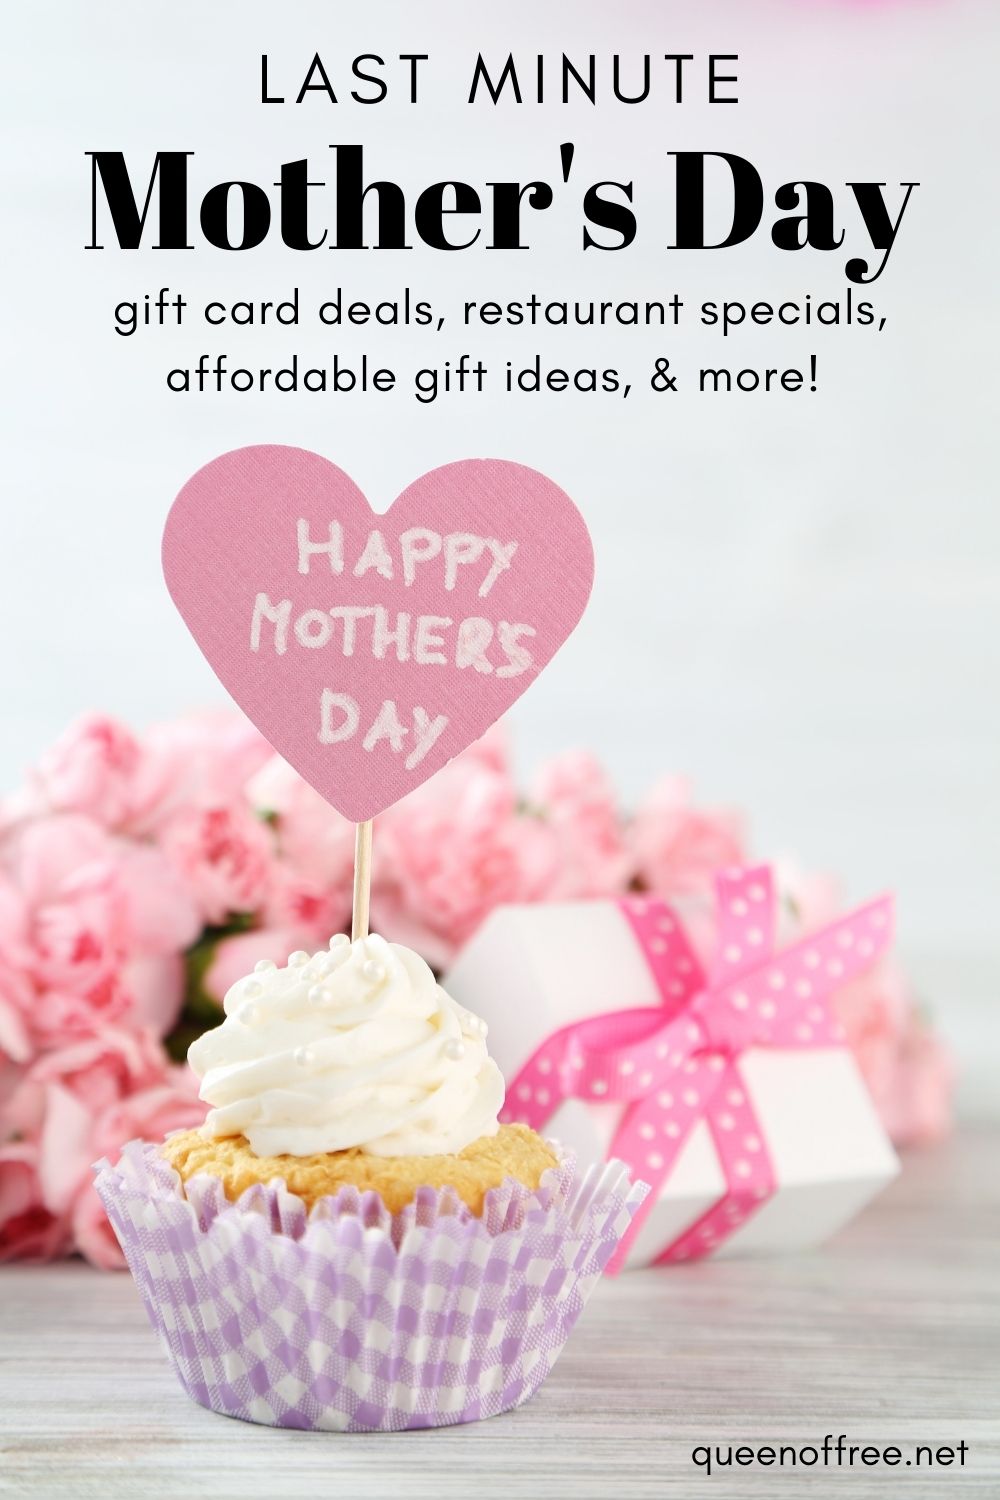 Last Minute Mother's Day Gift Card Deals & Ideas Queen